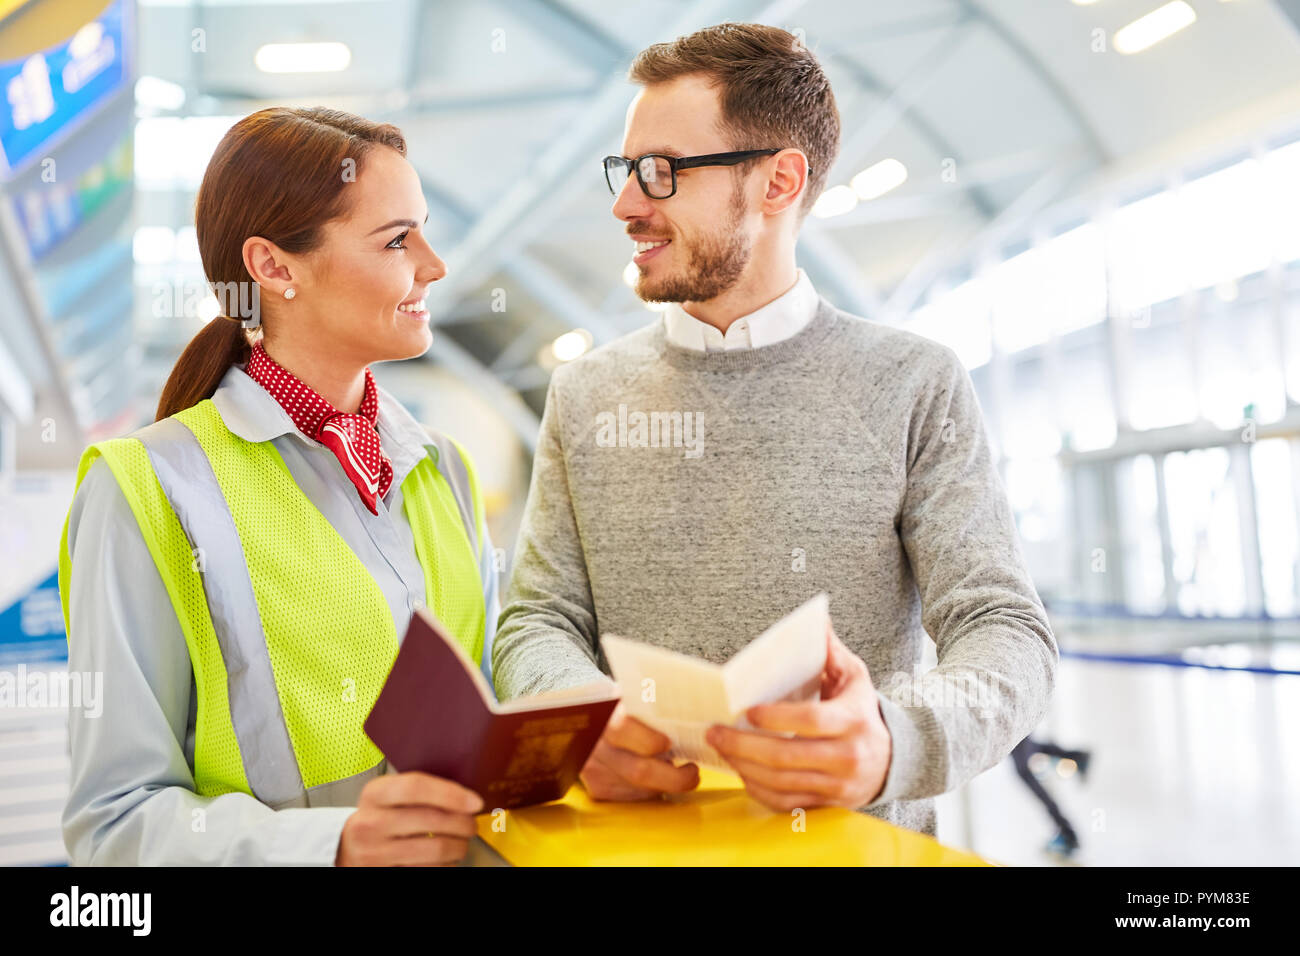 Service clerk and passenger with travel documents at the airport check-in counter Stock Photo